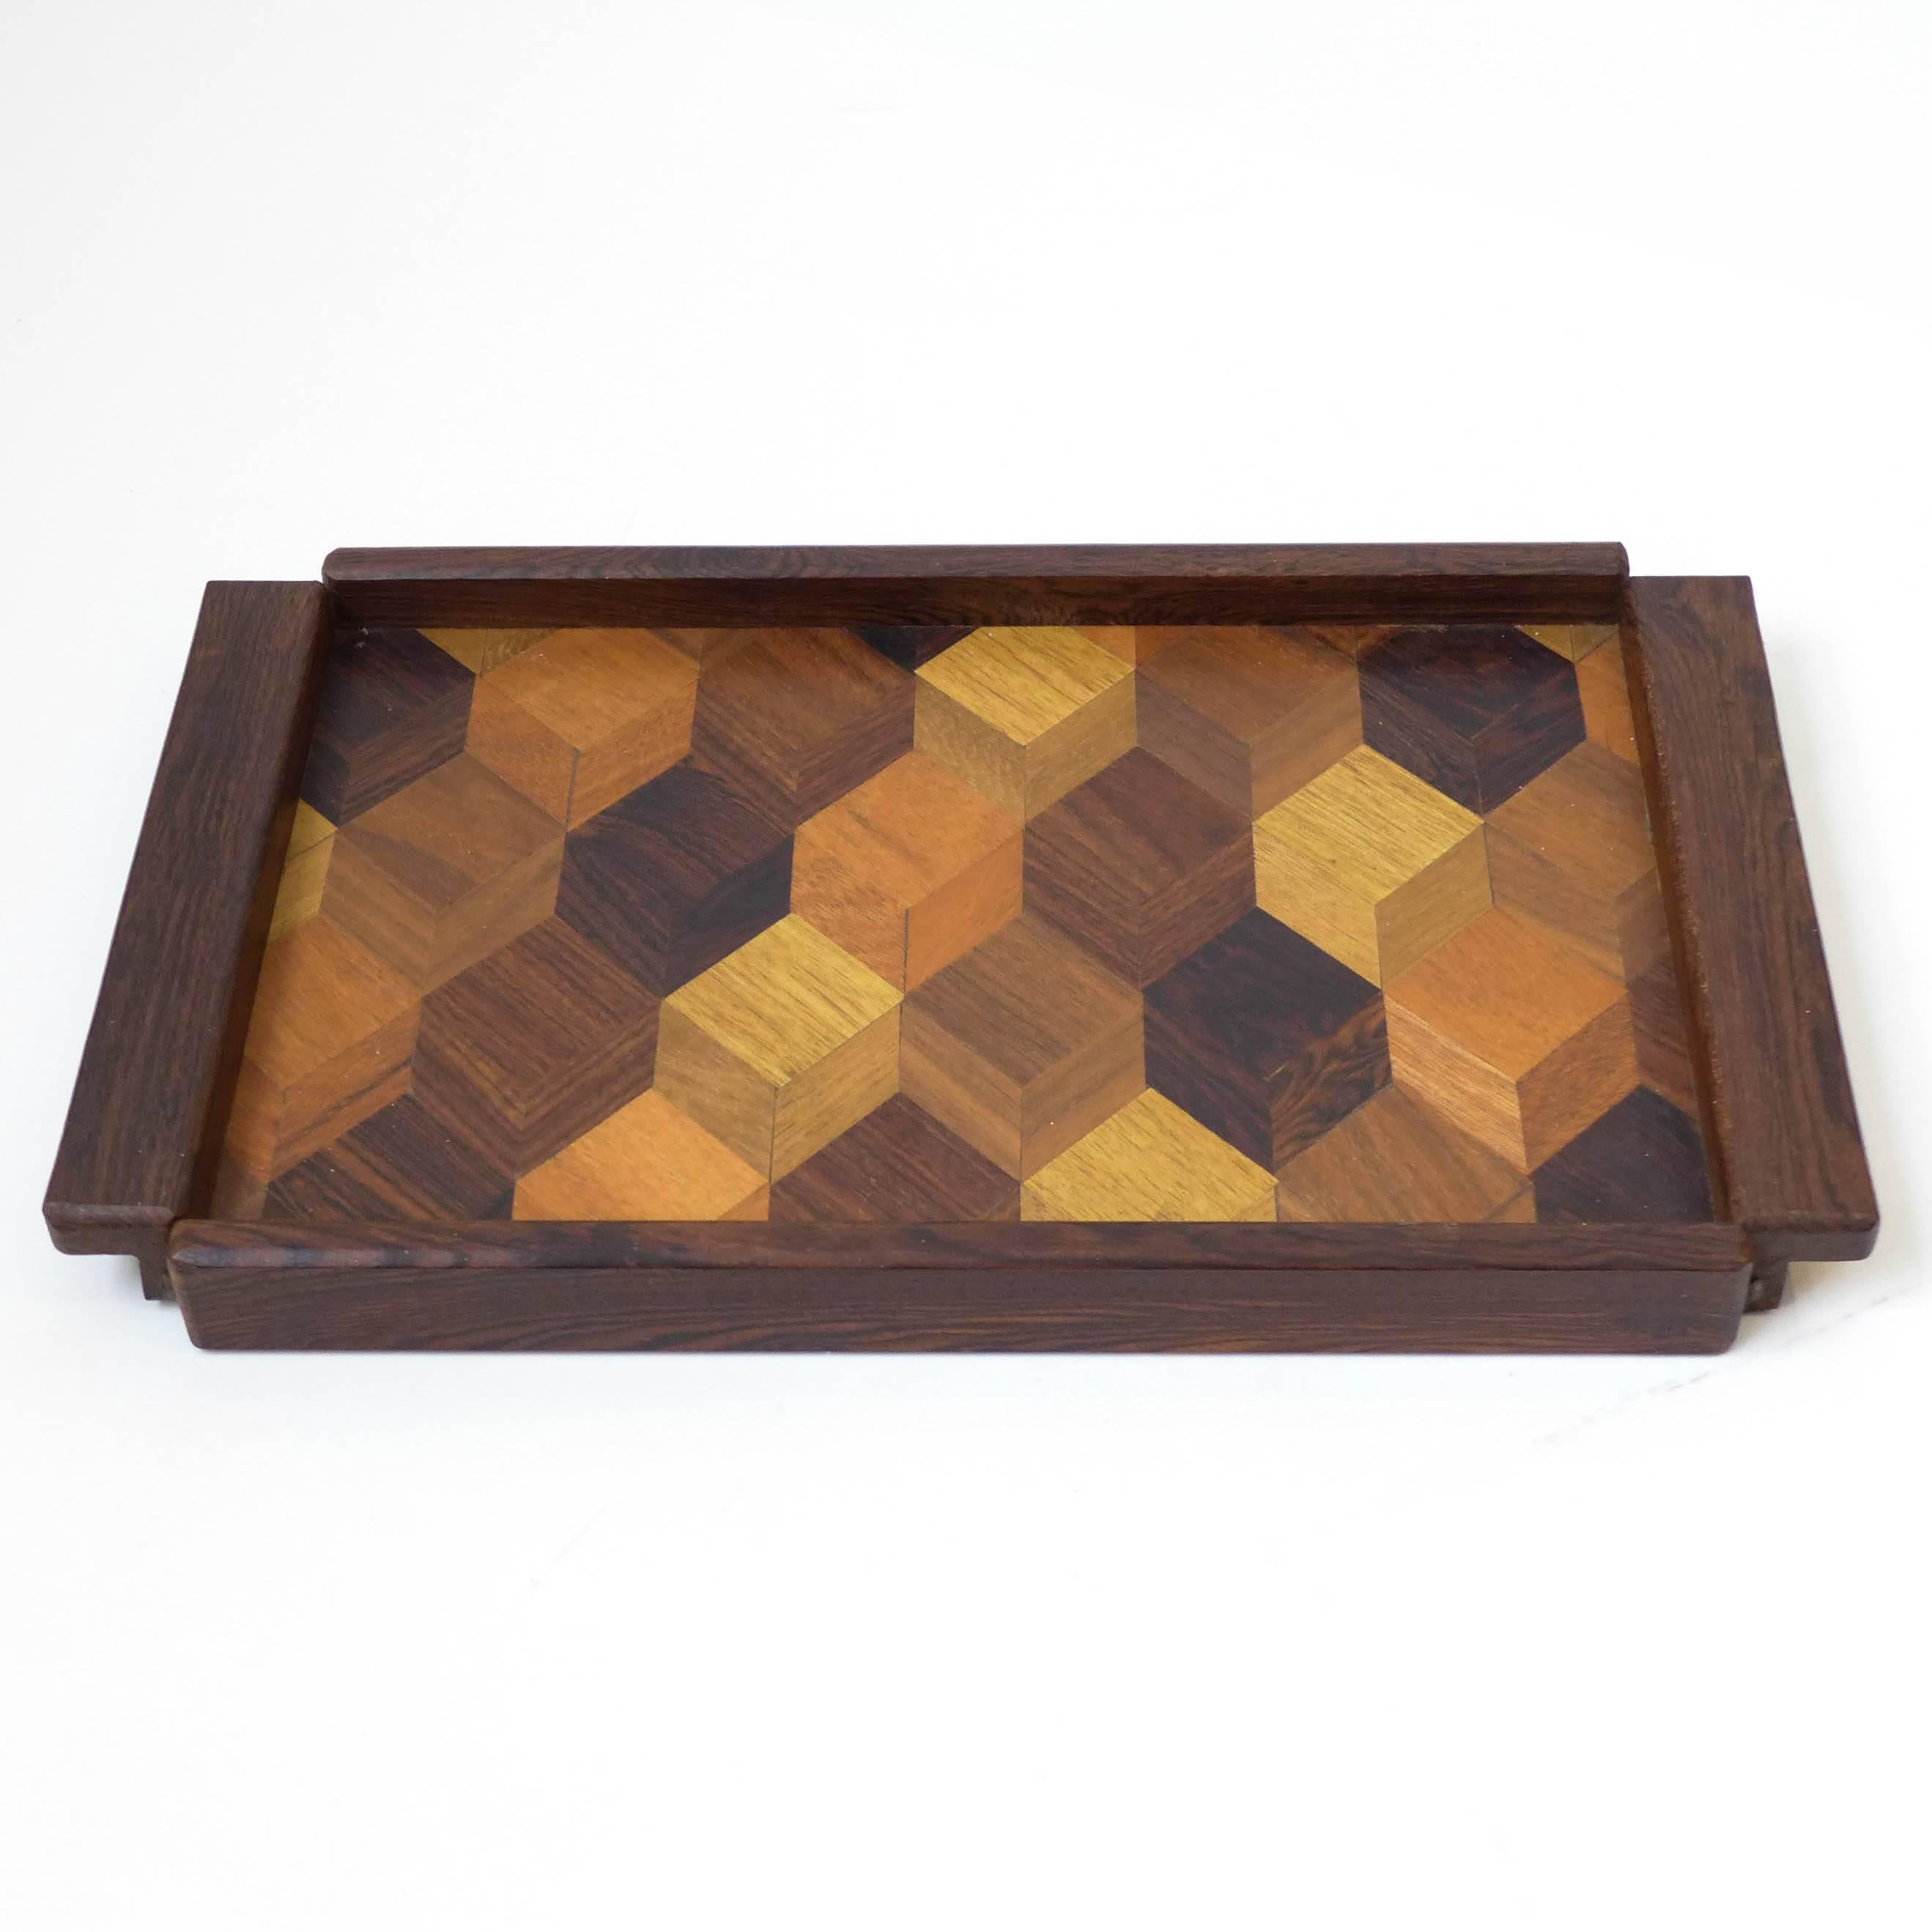 Quintessential Don Shoemaker tray, with cocobolo edges and a trompe l'oeil pattern of inlaid exotic woods in the center. A fine example of Shoemaker's design, in excellent original condition. From his Senal S.A. studio, Morelia, Mexico, circa 1960s.